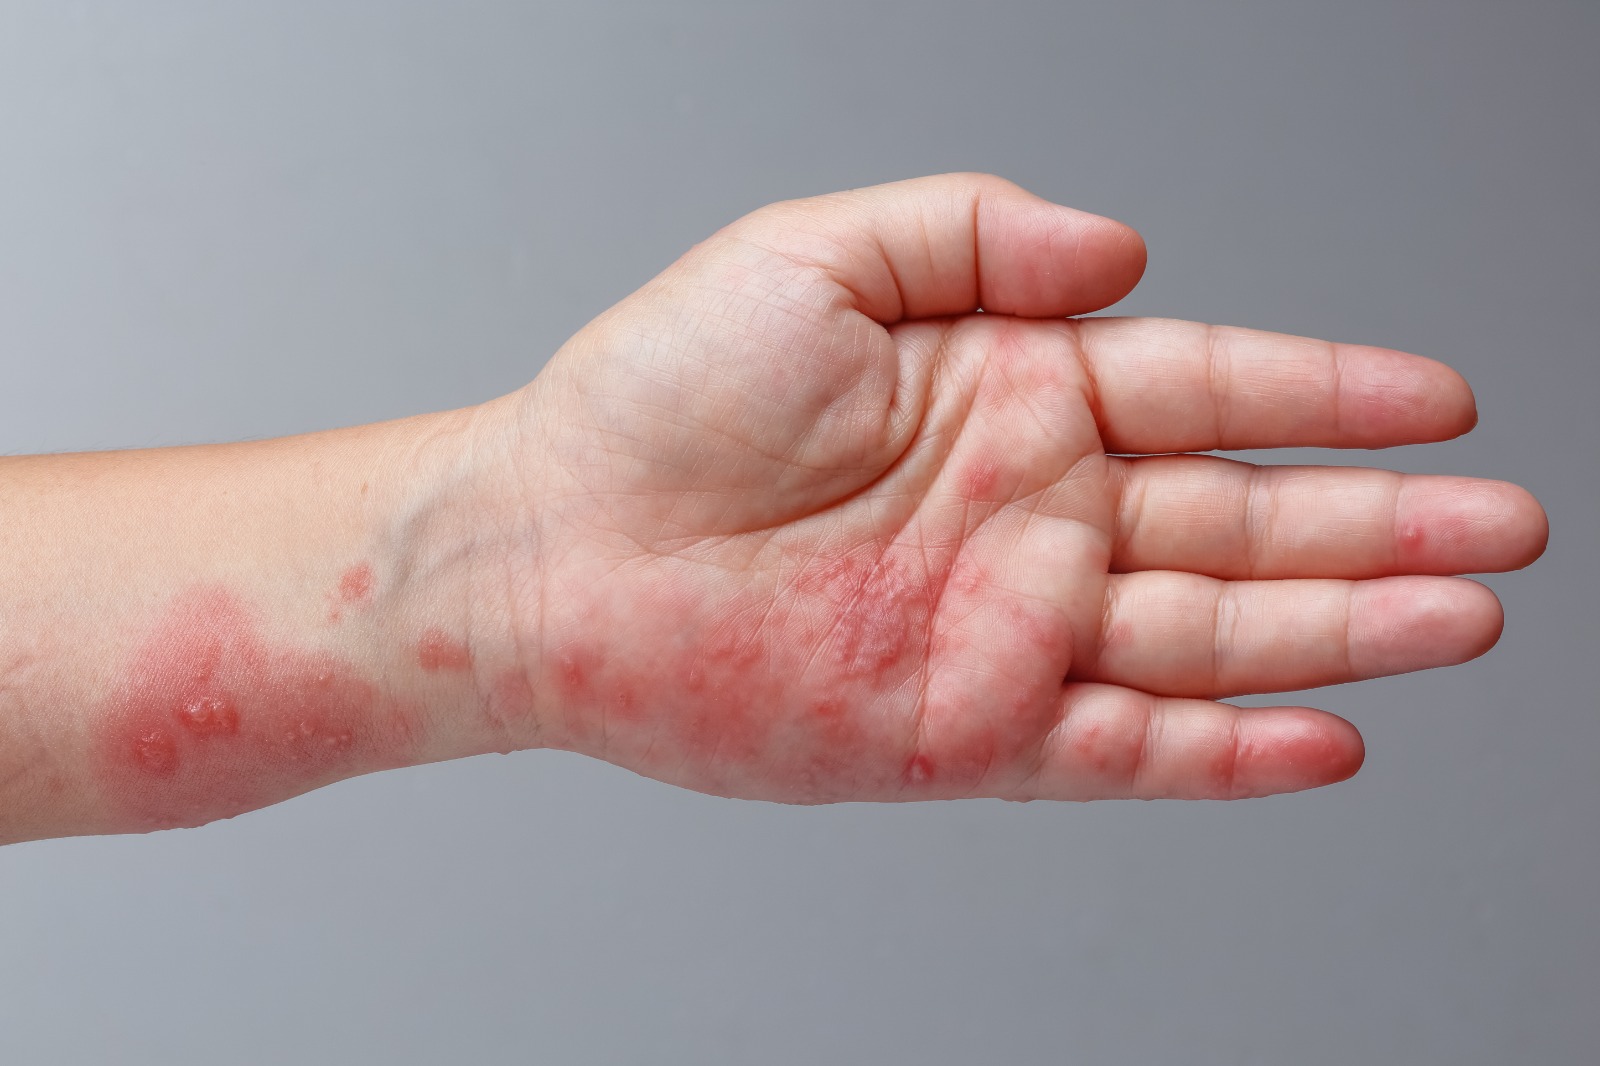 What is the best way to get rid of skin allergy?